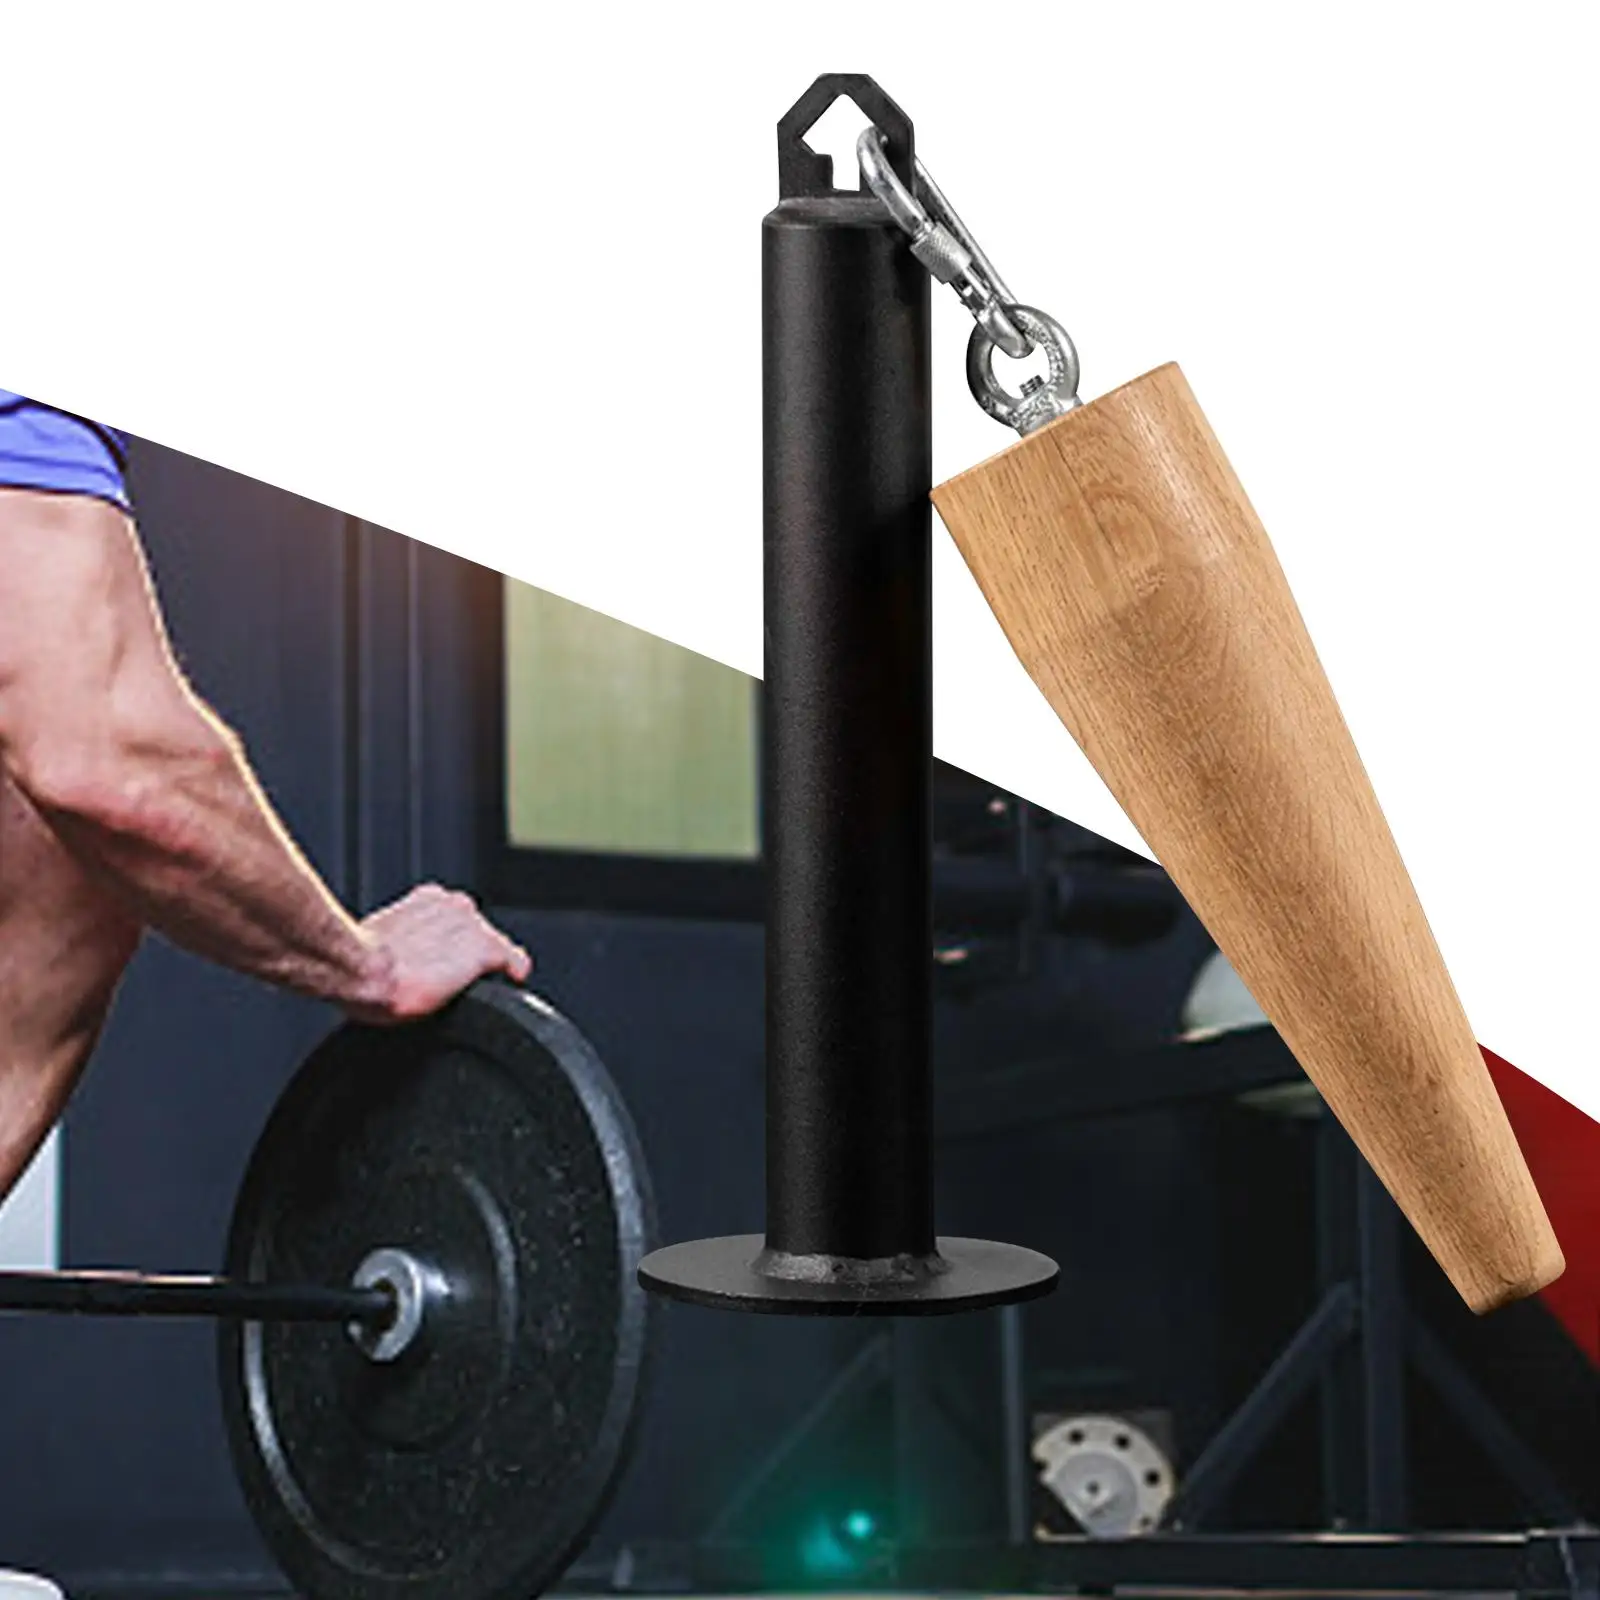 Loading Pin with Handle Fitness Equipment for Weight Plates Biceps Trainer Lifting Trainer for Grip Strength Workout Home Gym